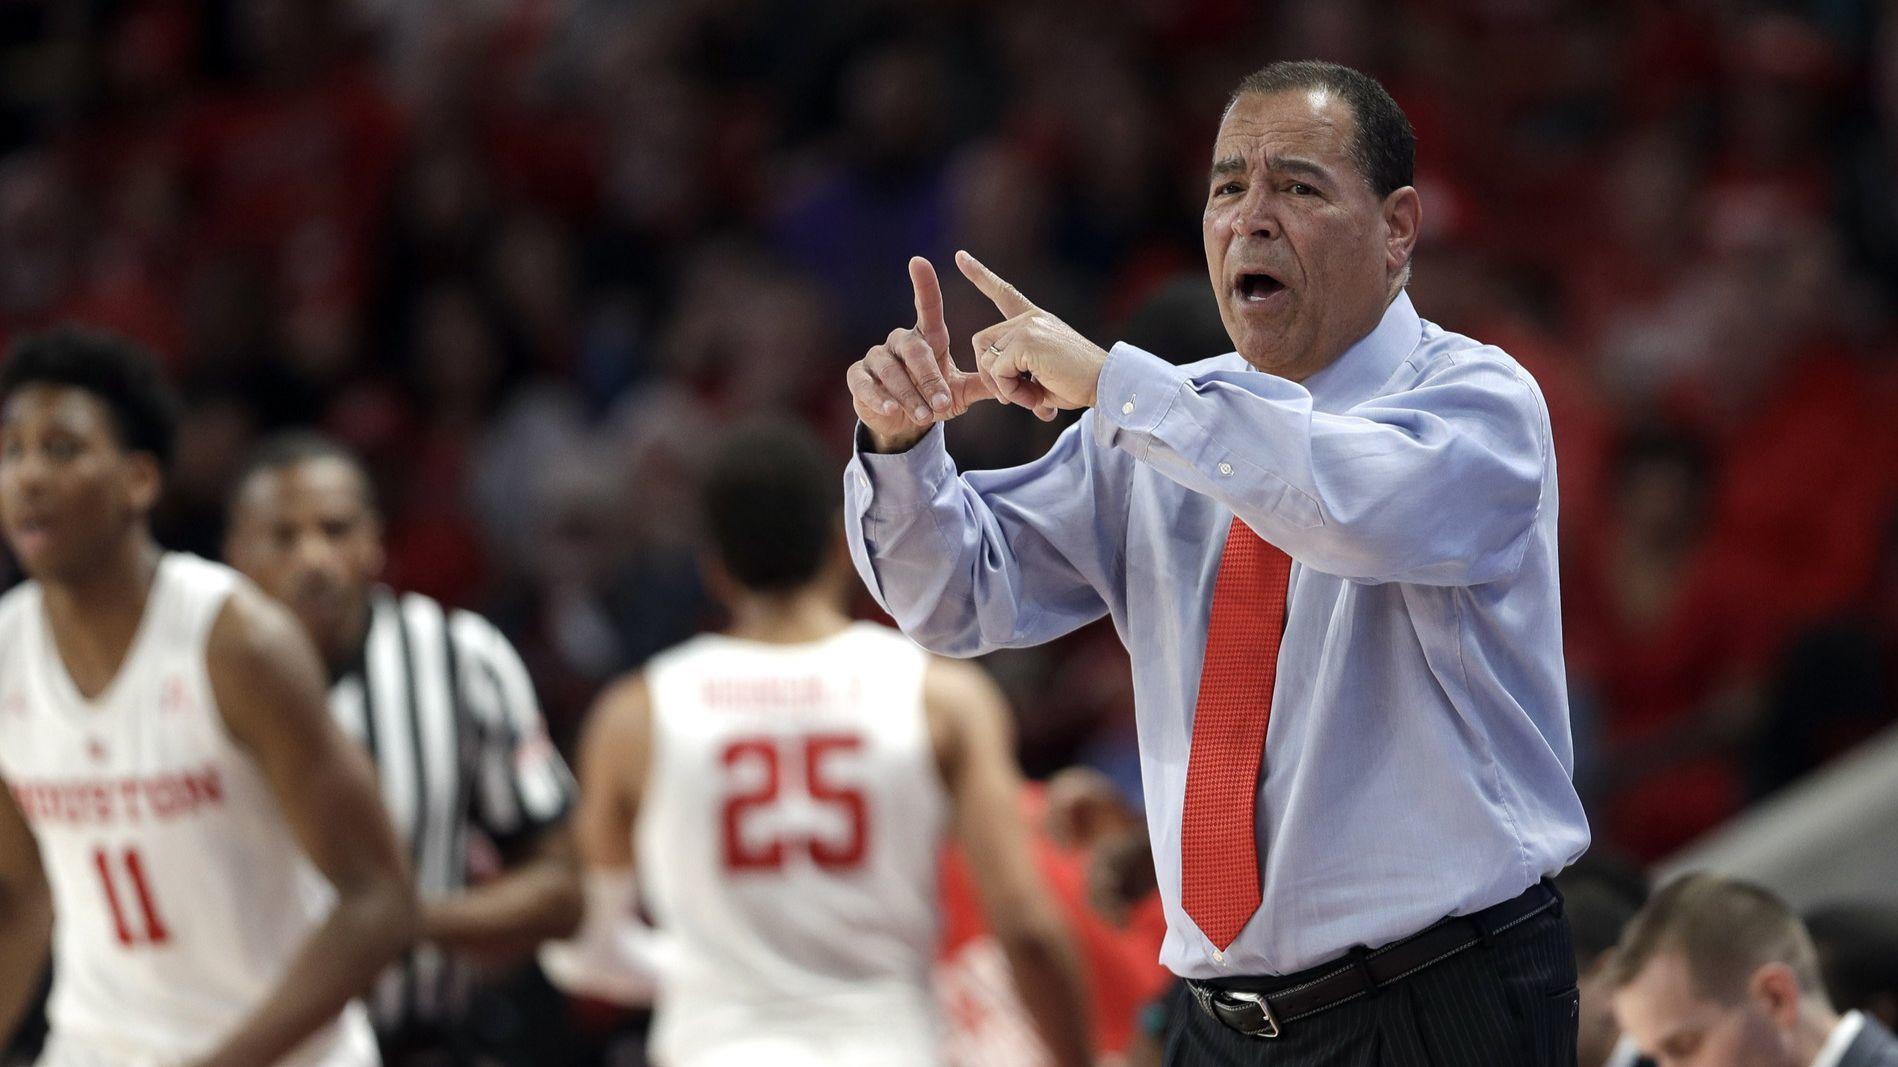 11 years ago, Kelvin Sampson was effectively banned from the NCAA. Now